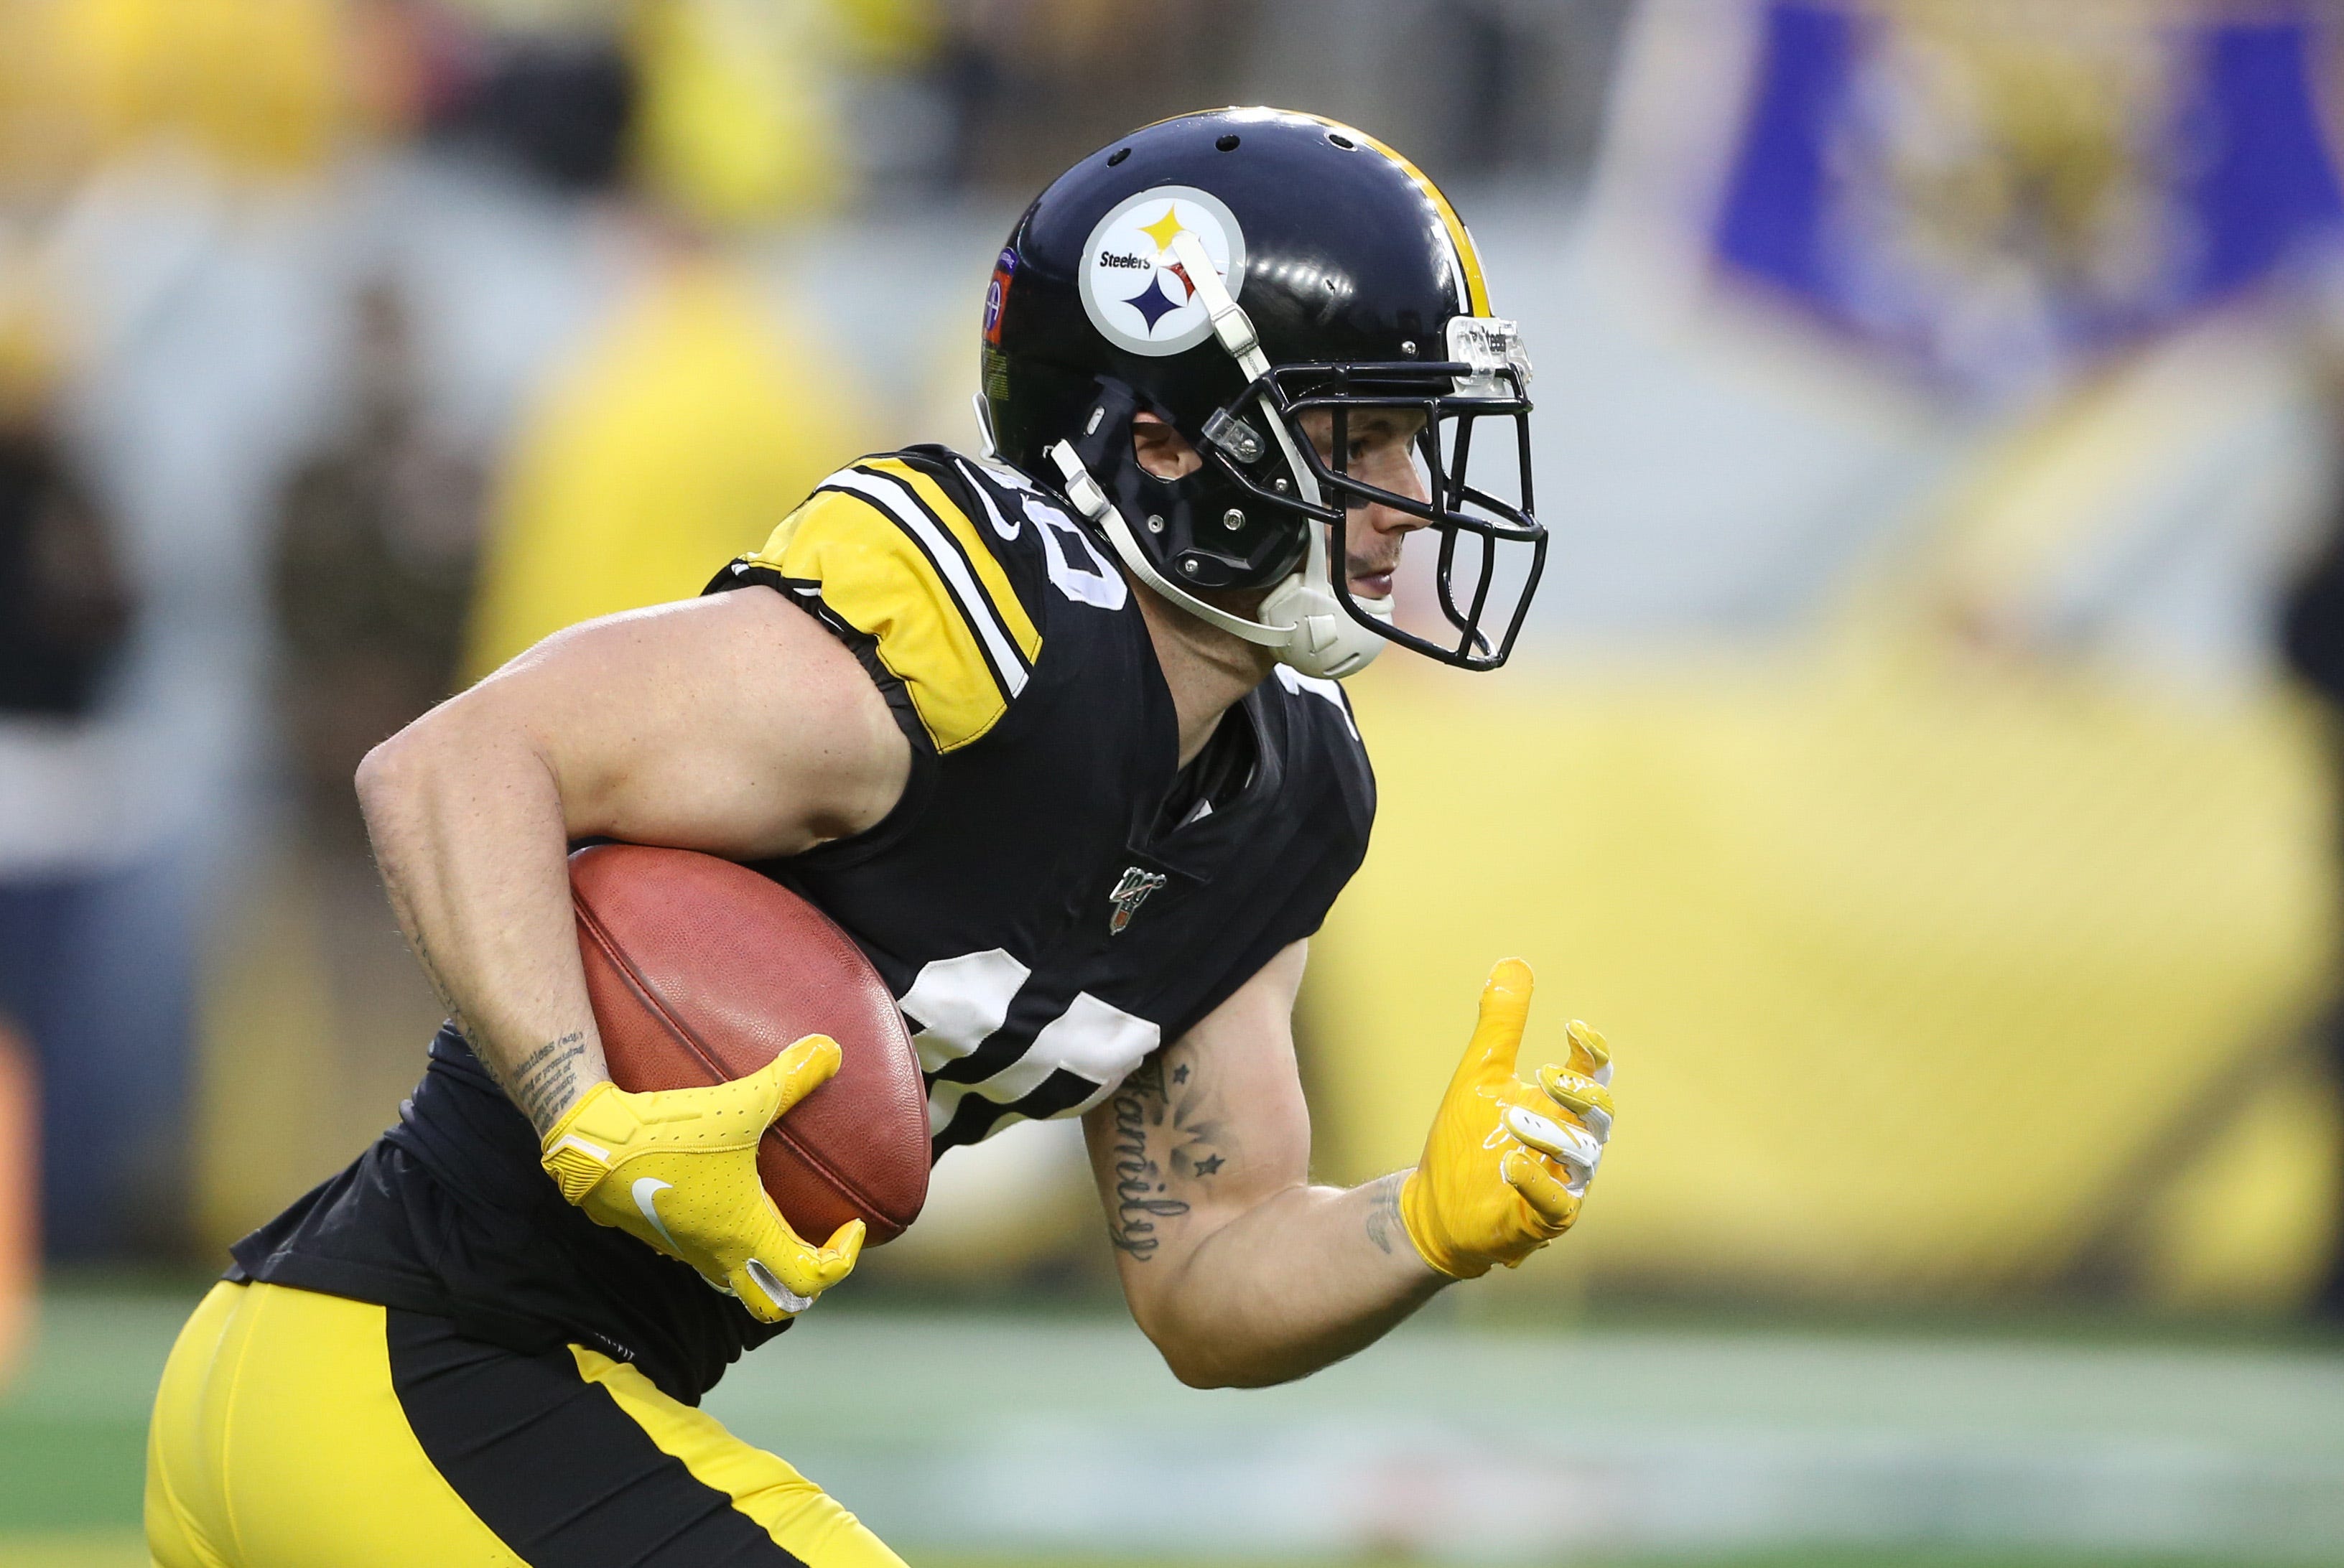 Ryan Switzer's 9-month-old son, Christian, stable after surgery, COVID-19 diagnosis